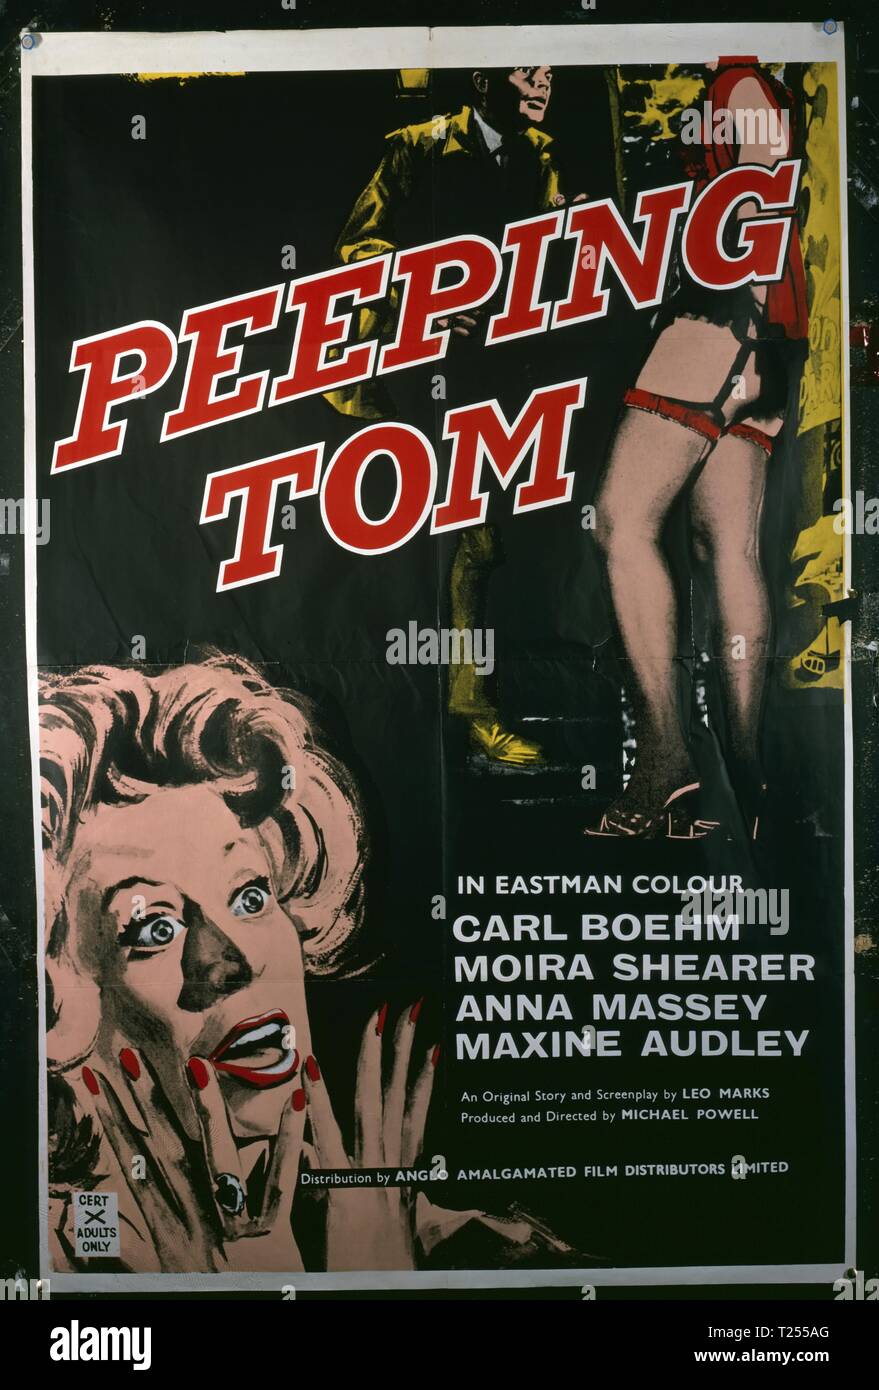 Peeping Tom (1960)  Publicity information, film poster     Date: 1960 Stock Photo